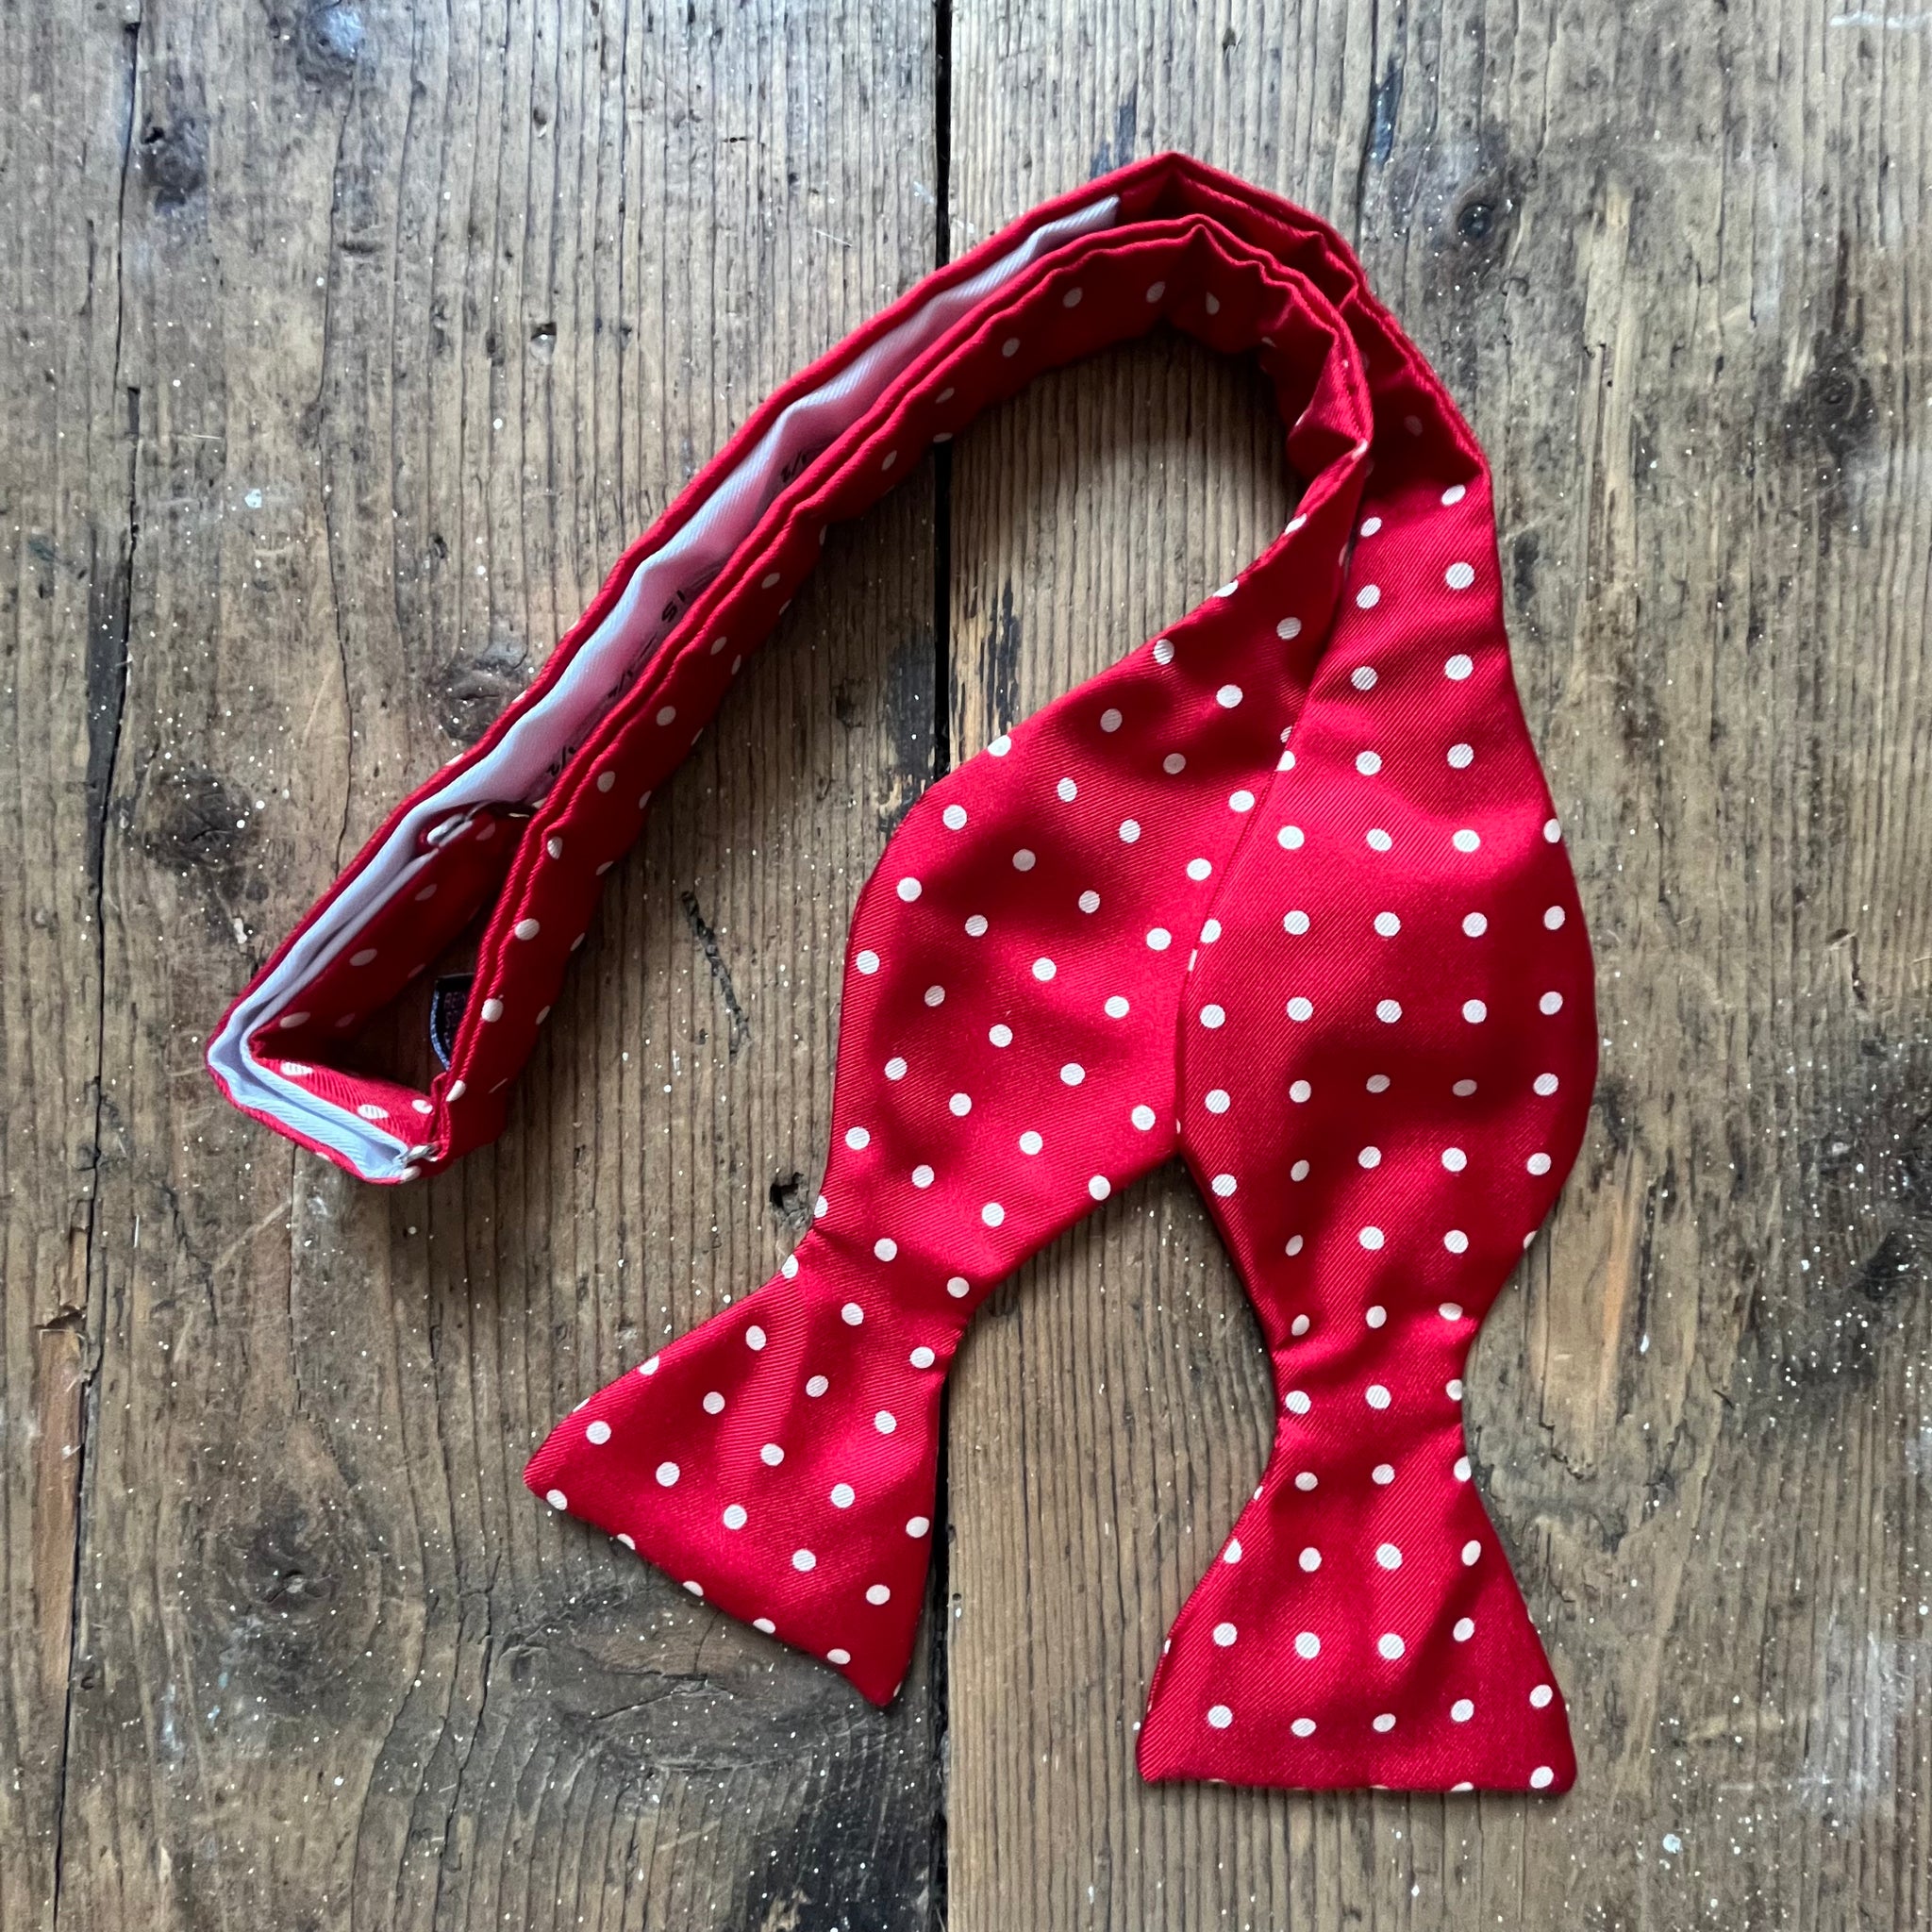 Crimson red silk bow ties with white spots